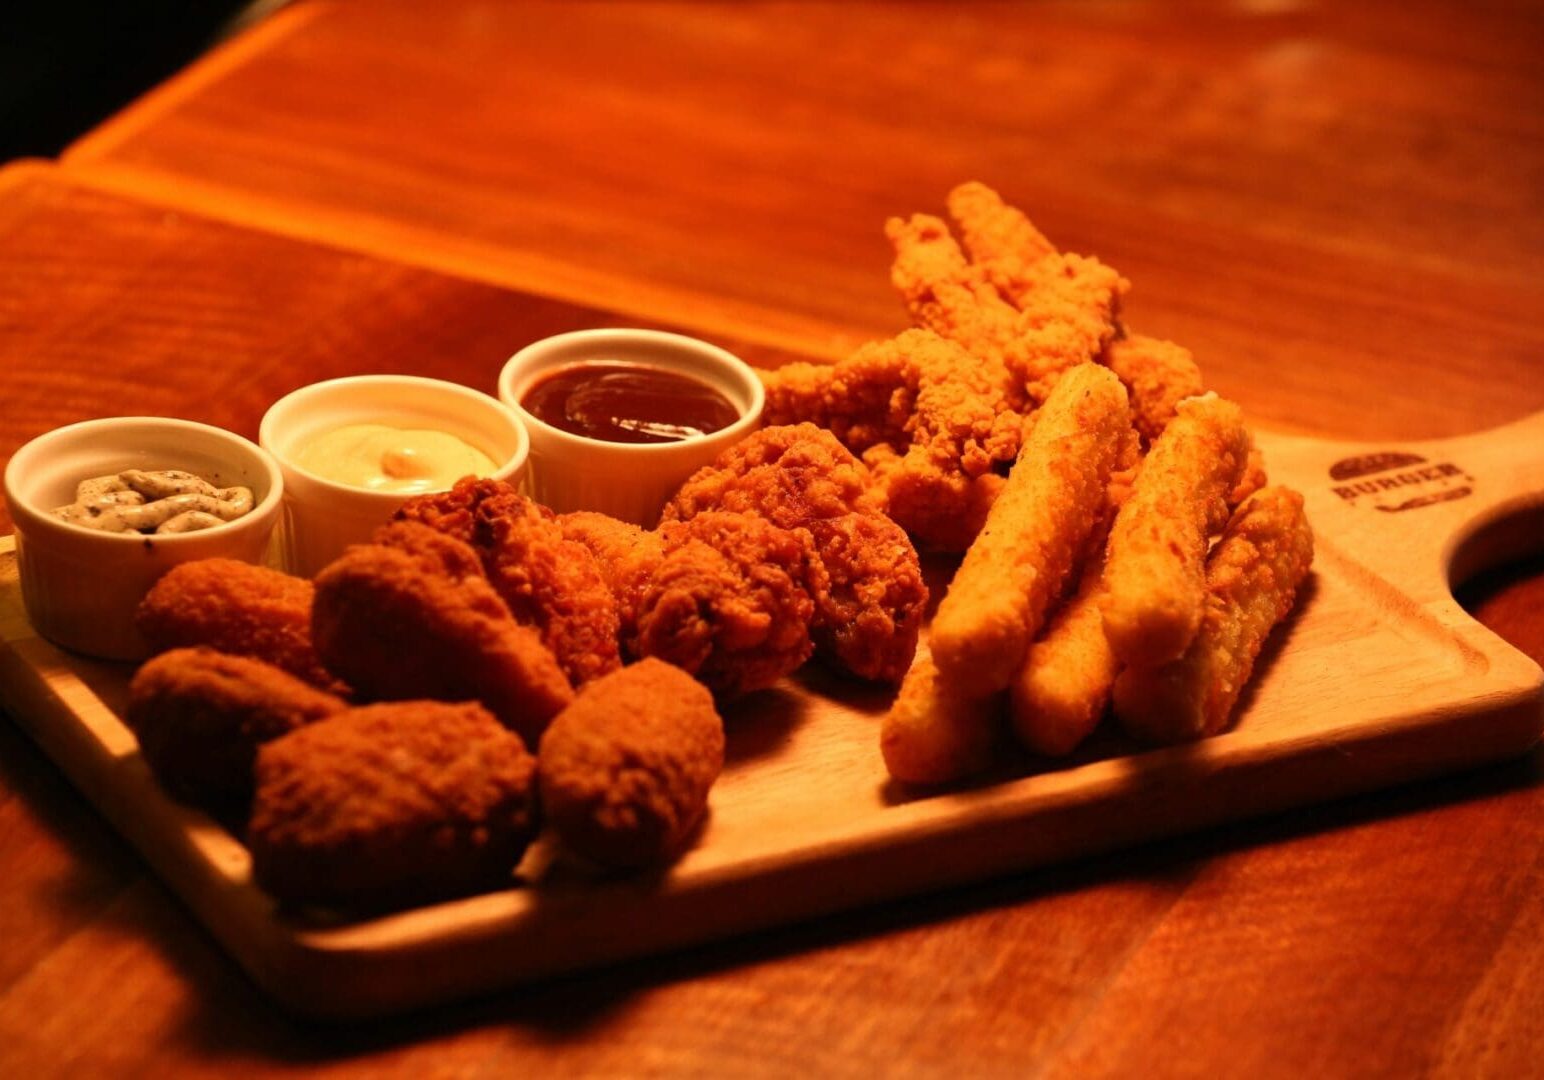 A wooden board with some fried food on it